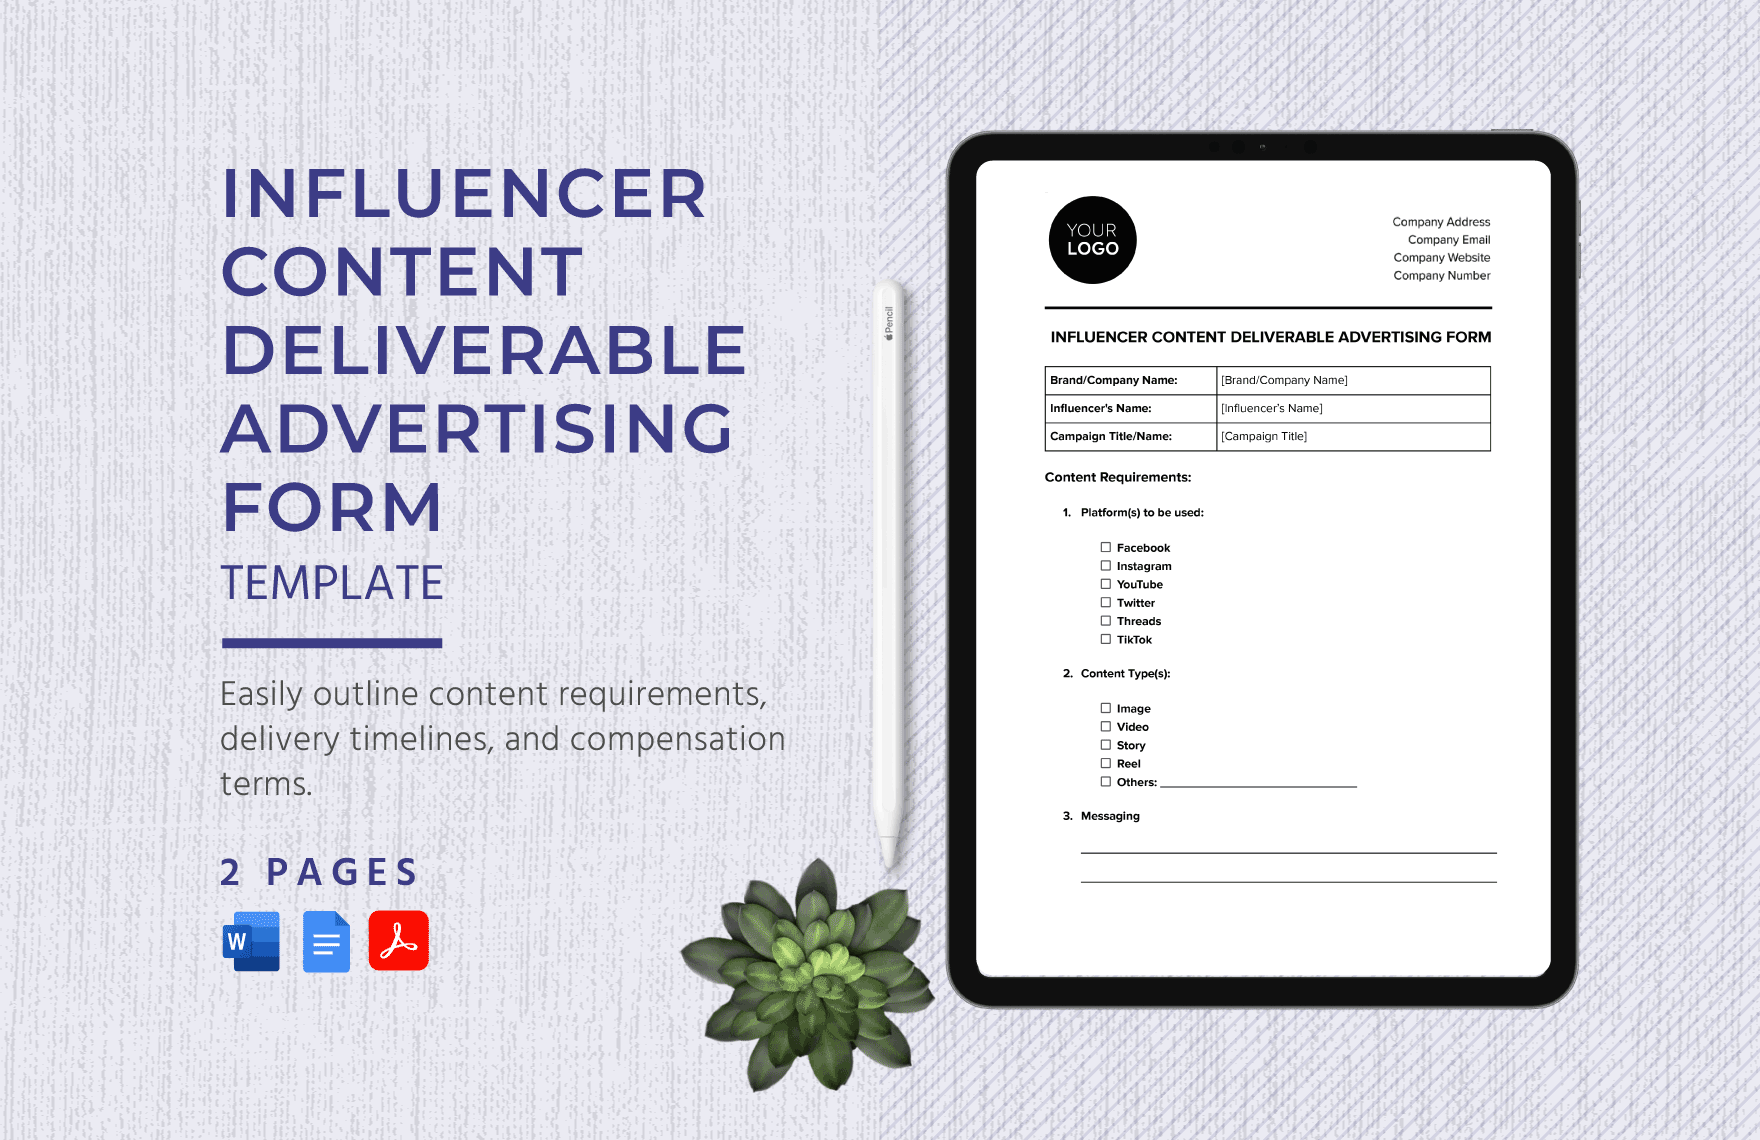 Influencer Content Deliverable Advertising Form Template in Word, Google Docs, PDF